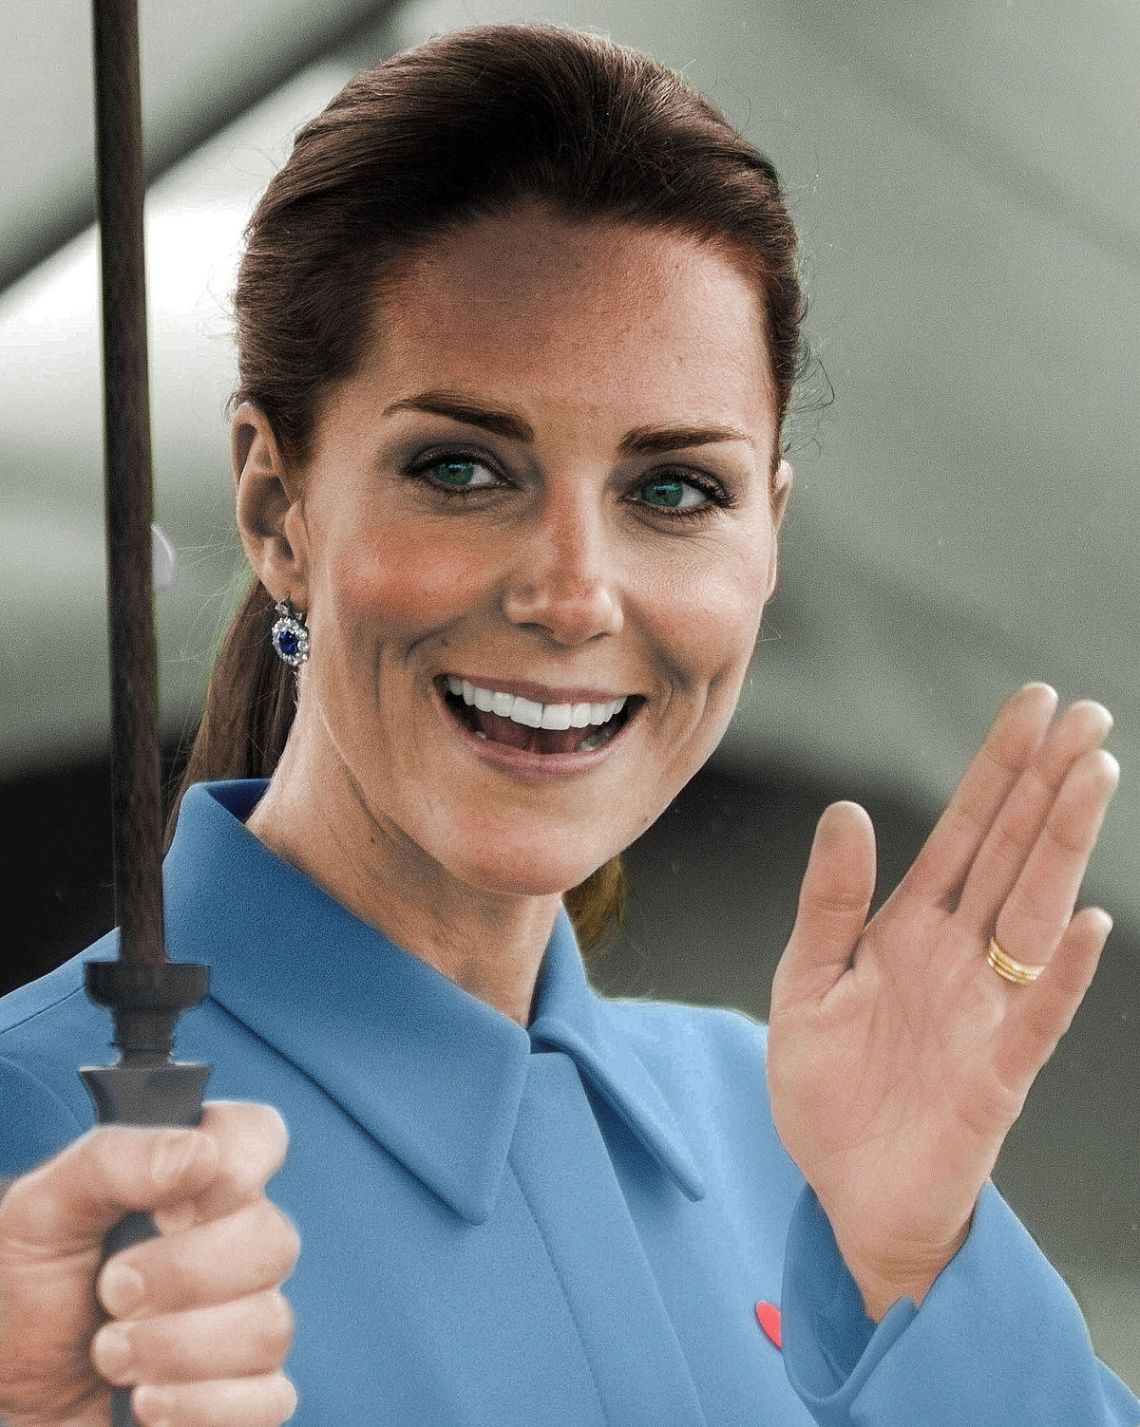 The Kate Middleton Effect